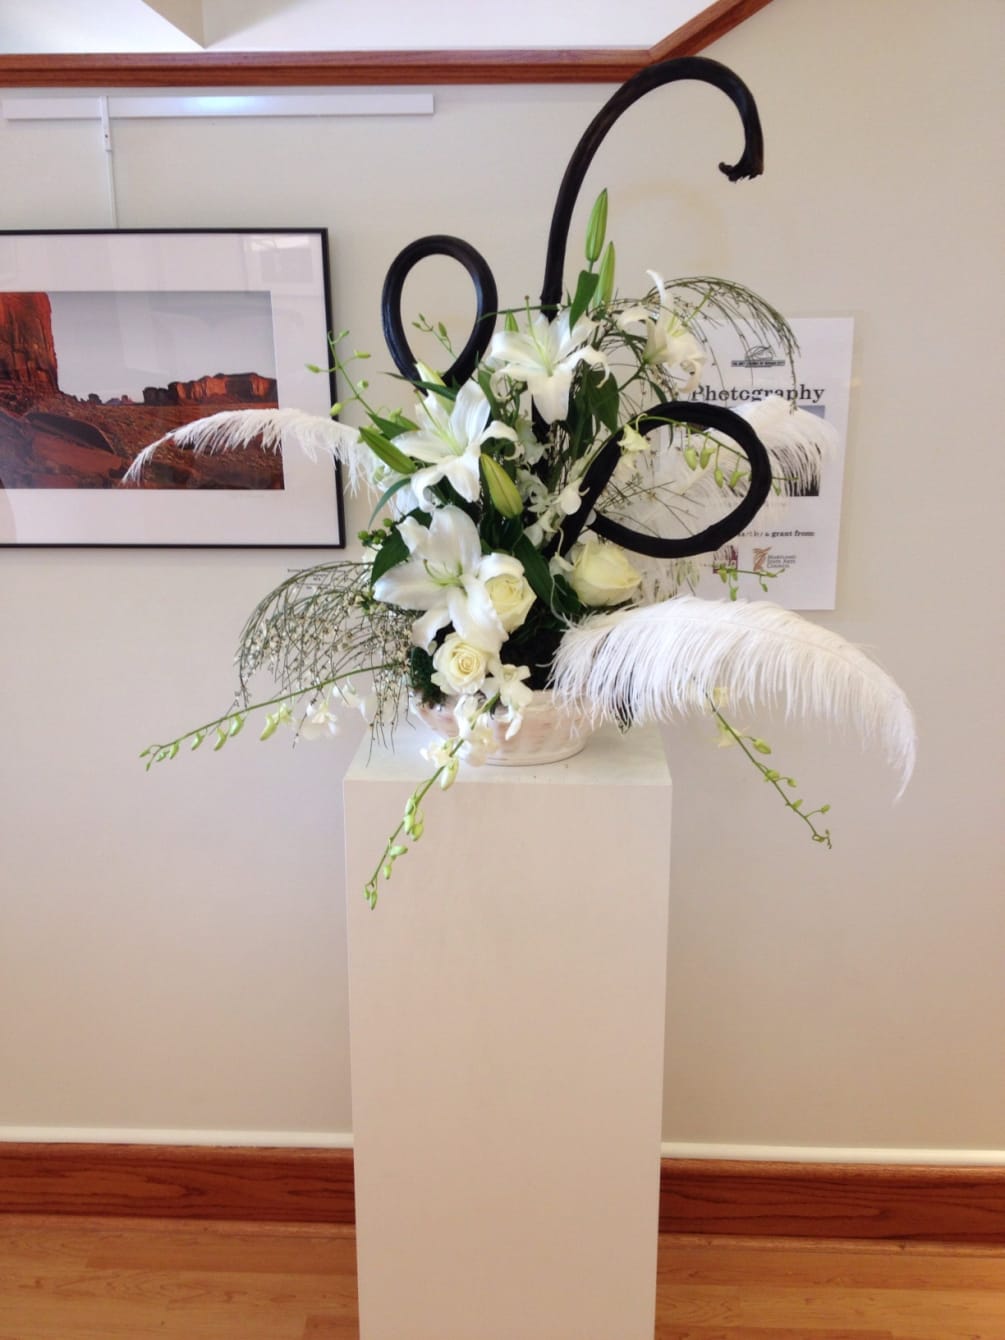 A dramatic arrangement of ostrich feathers, white lilies, roses, genestra, dendrobium orchids